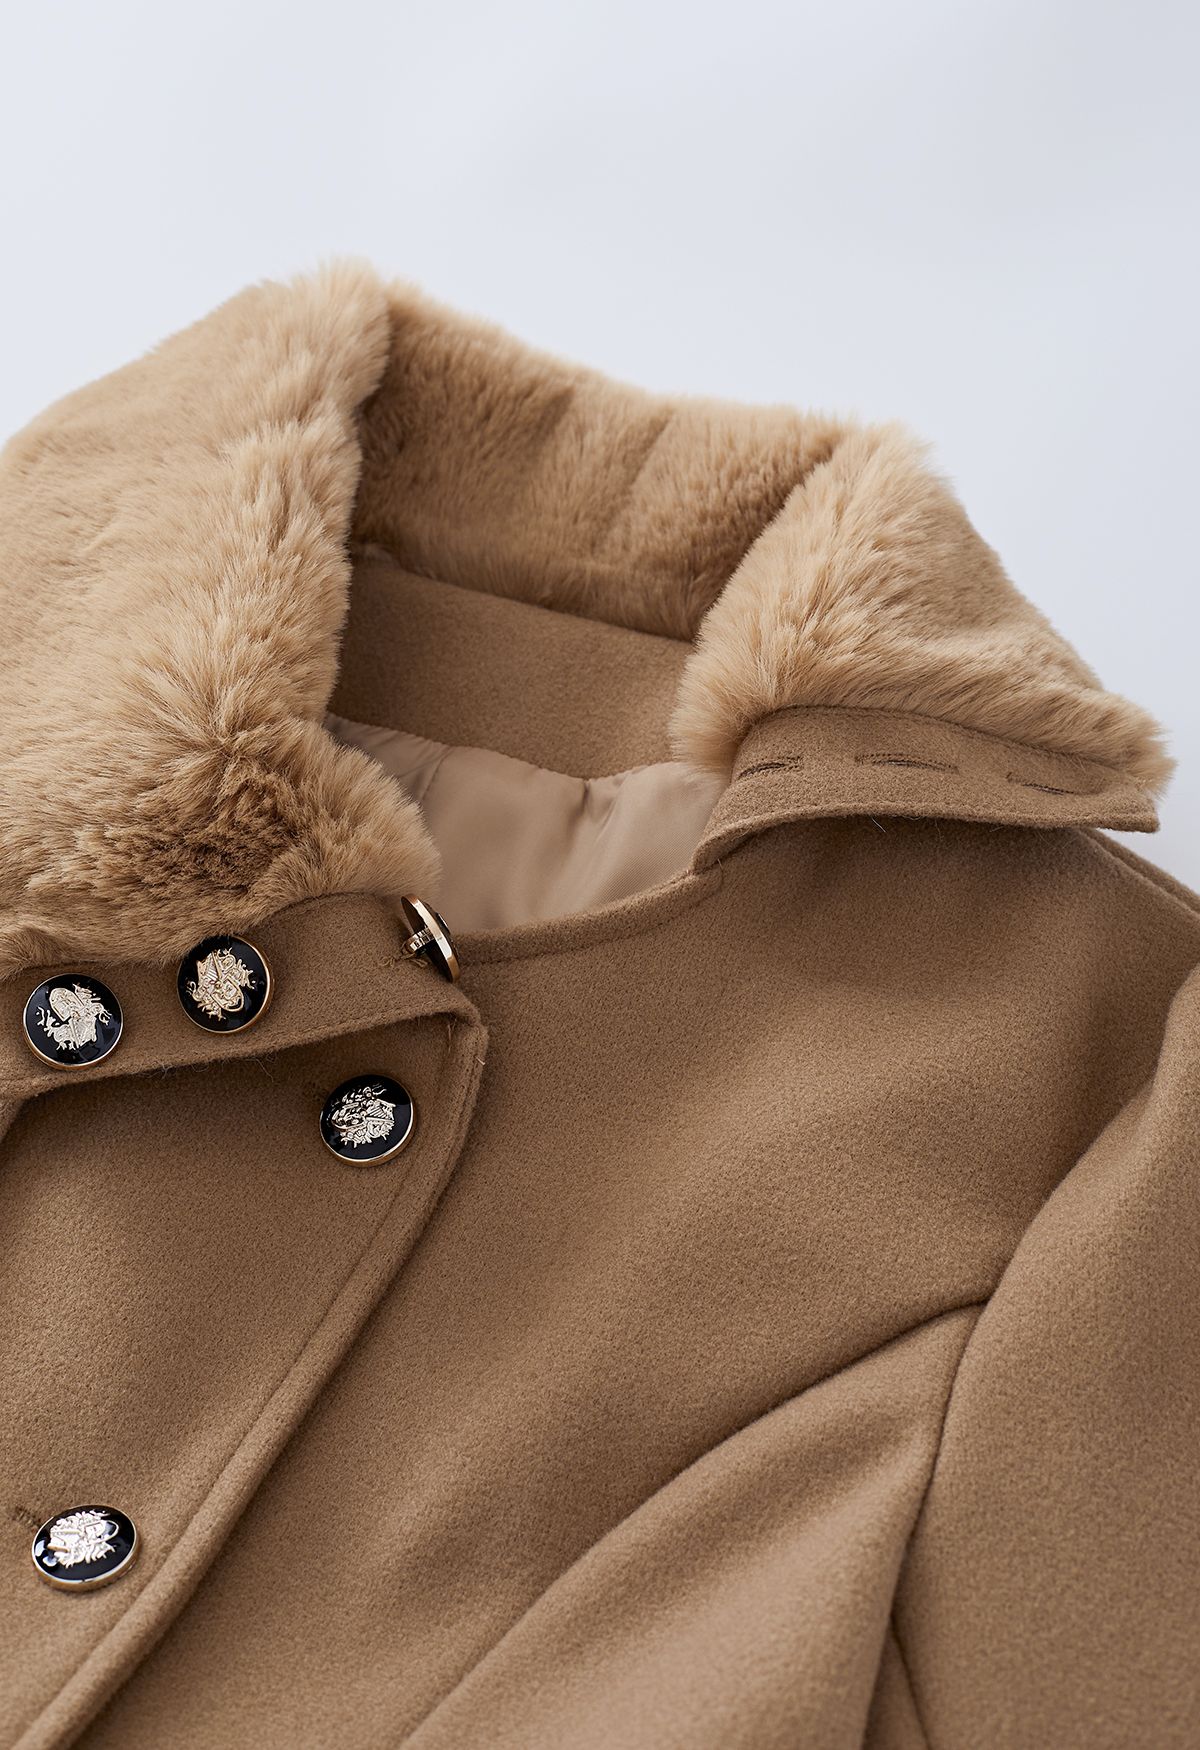 Faux Fur Collar Double-Breasted Skater Coat in Tan